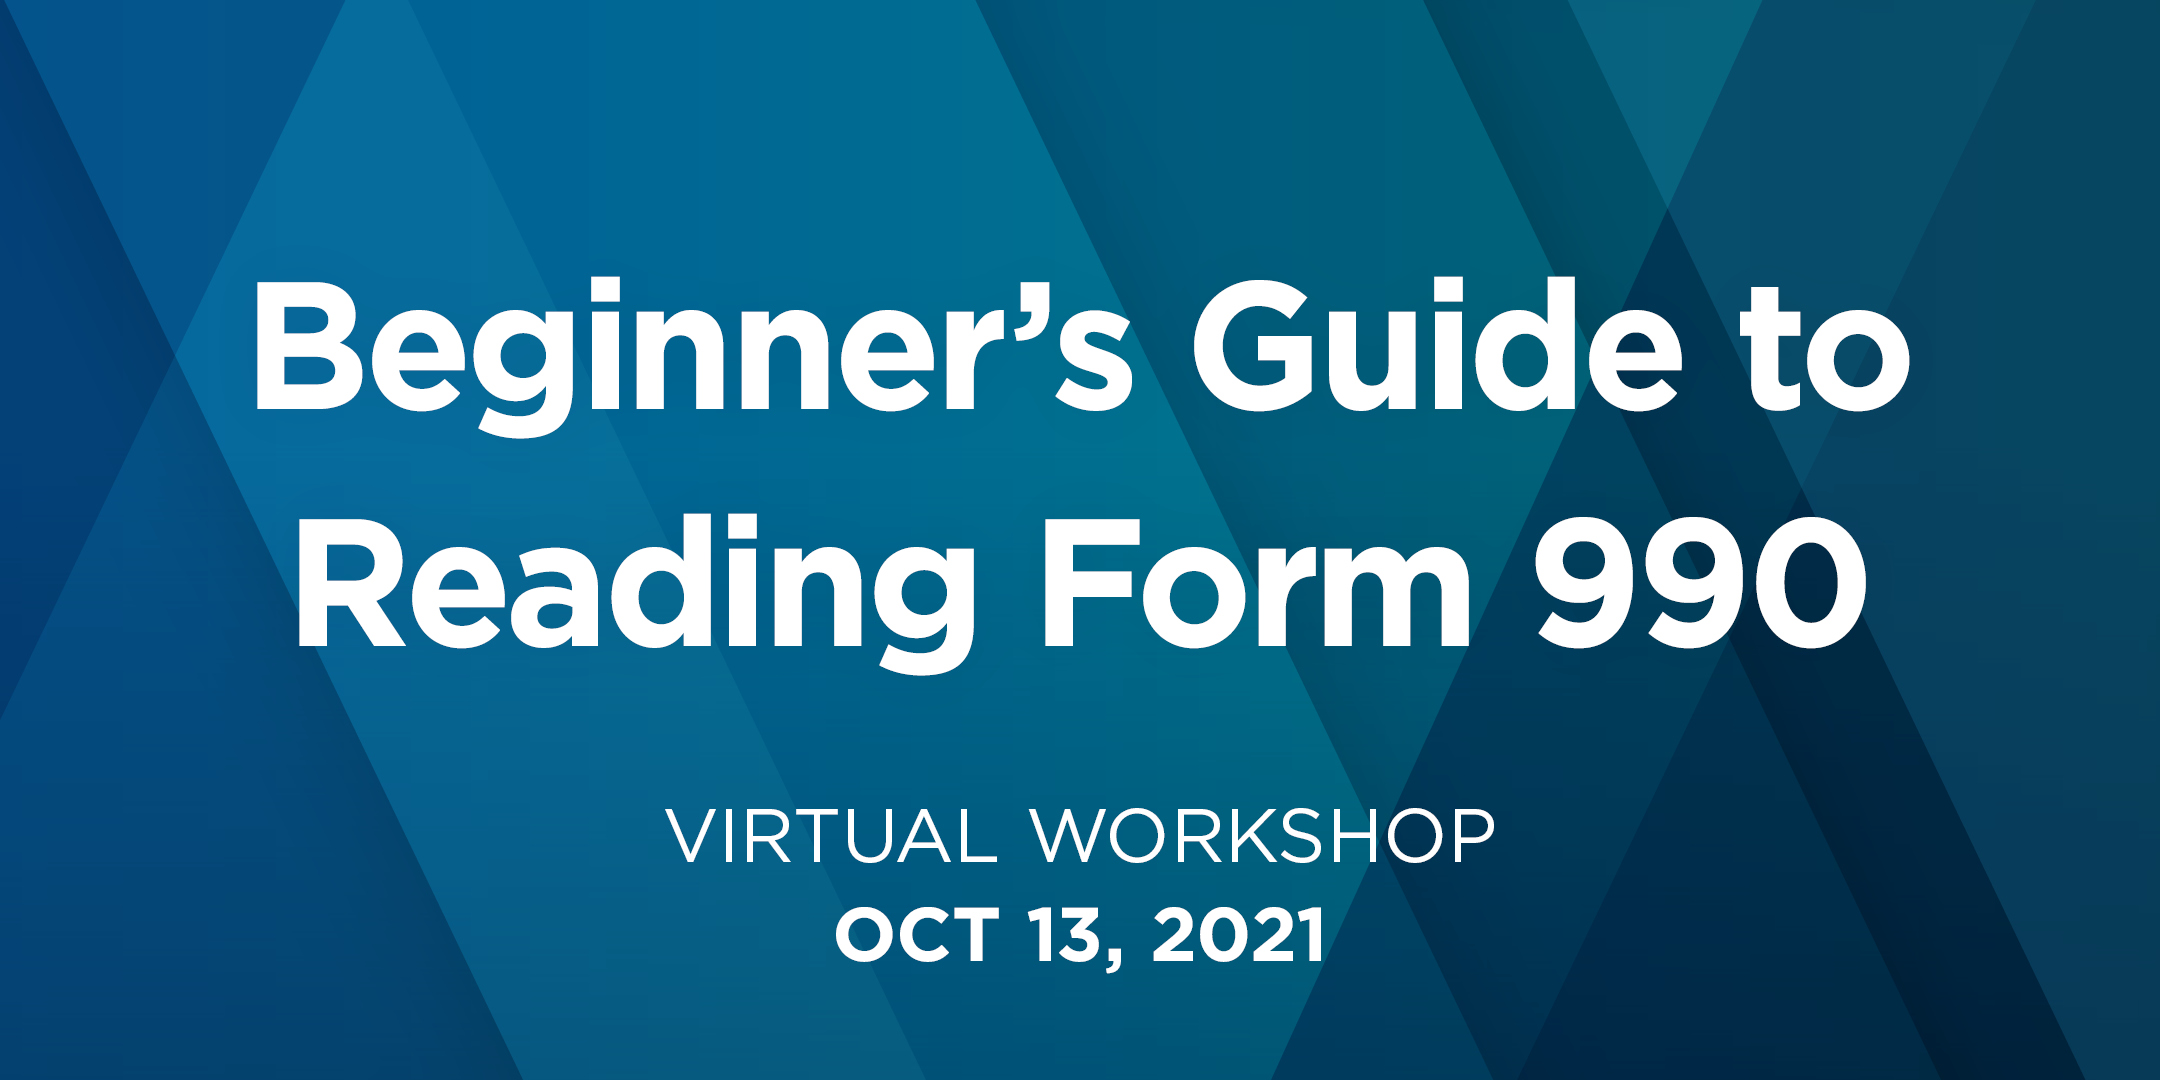 Beginner's Guide to Reading Form 990